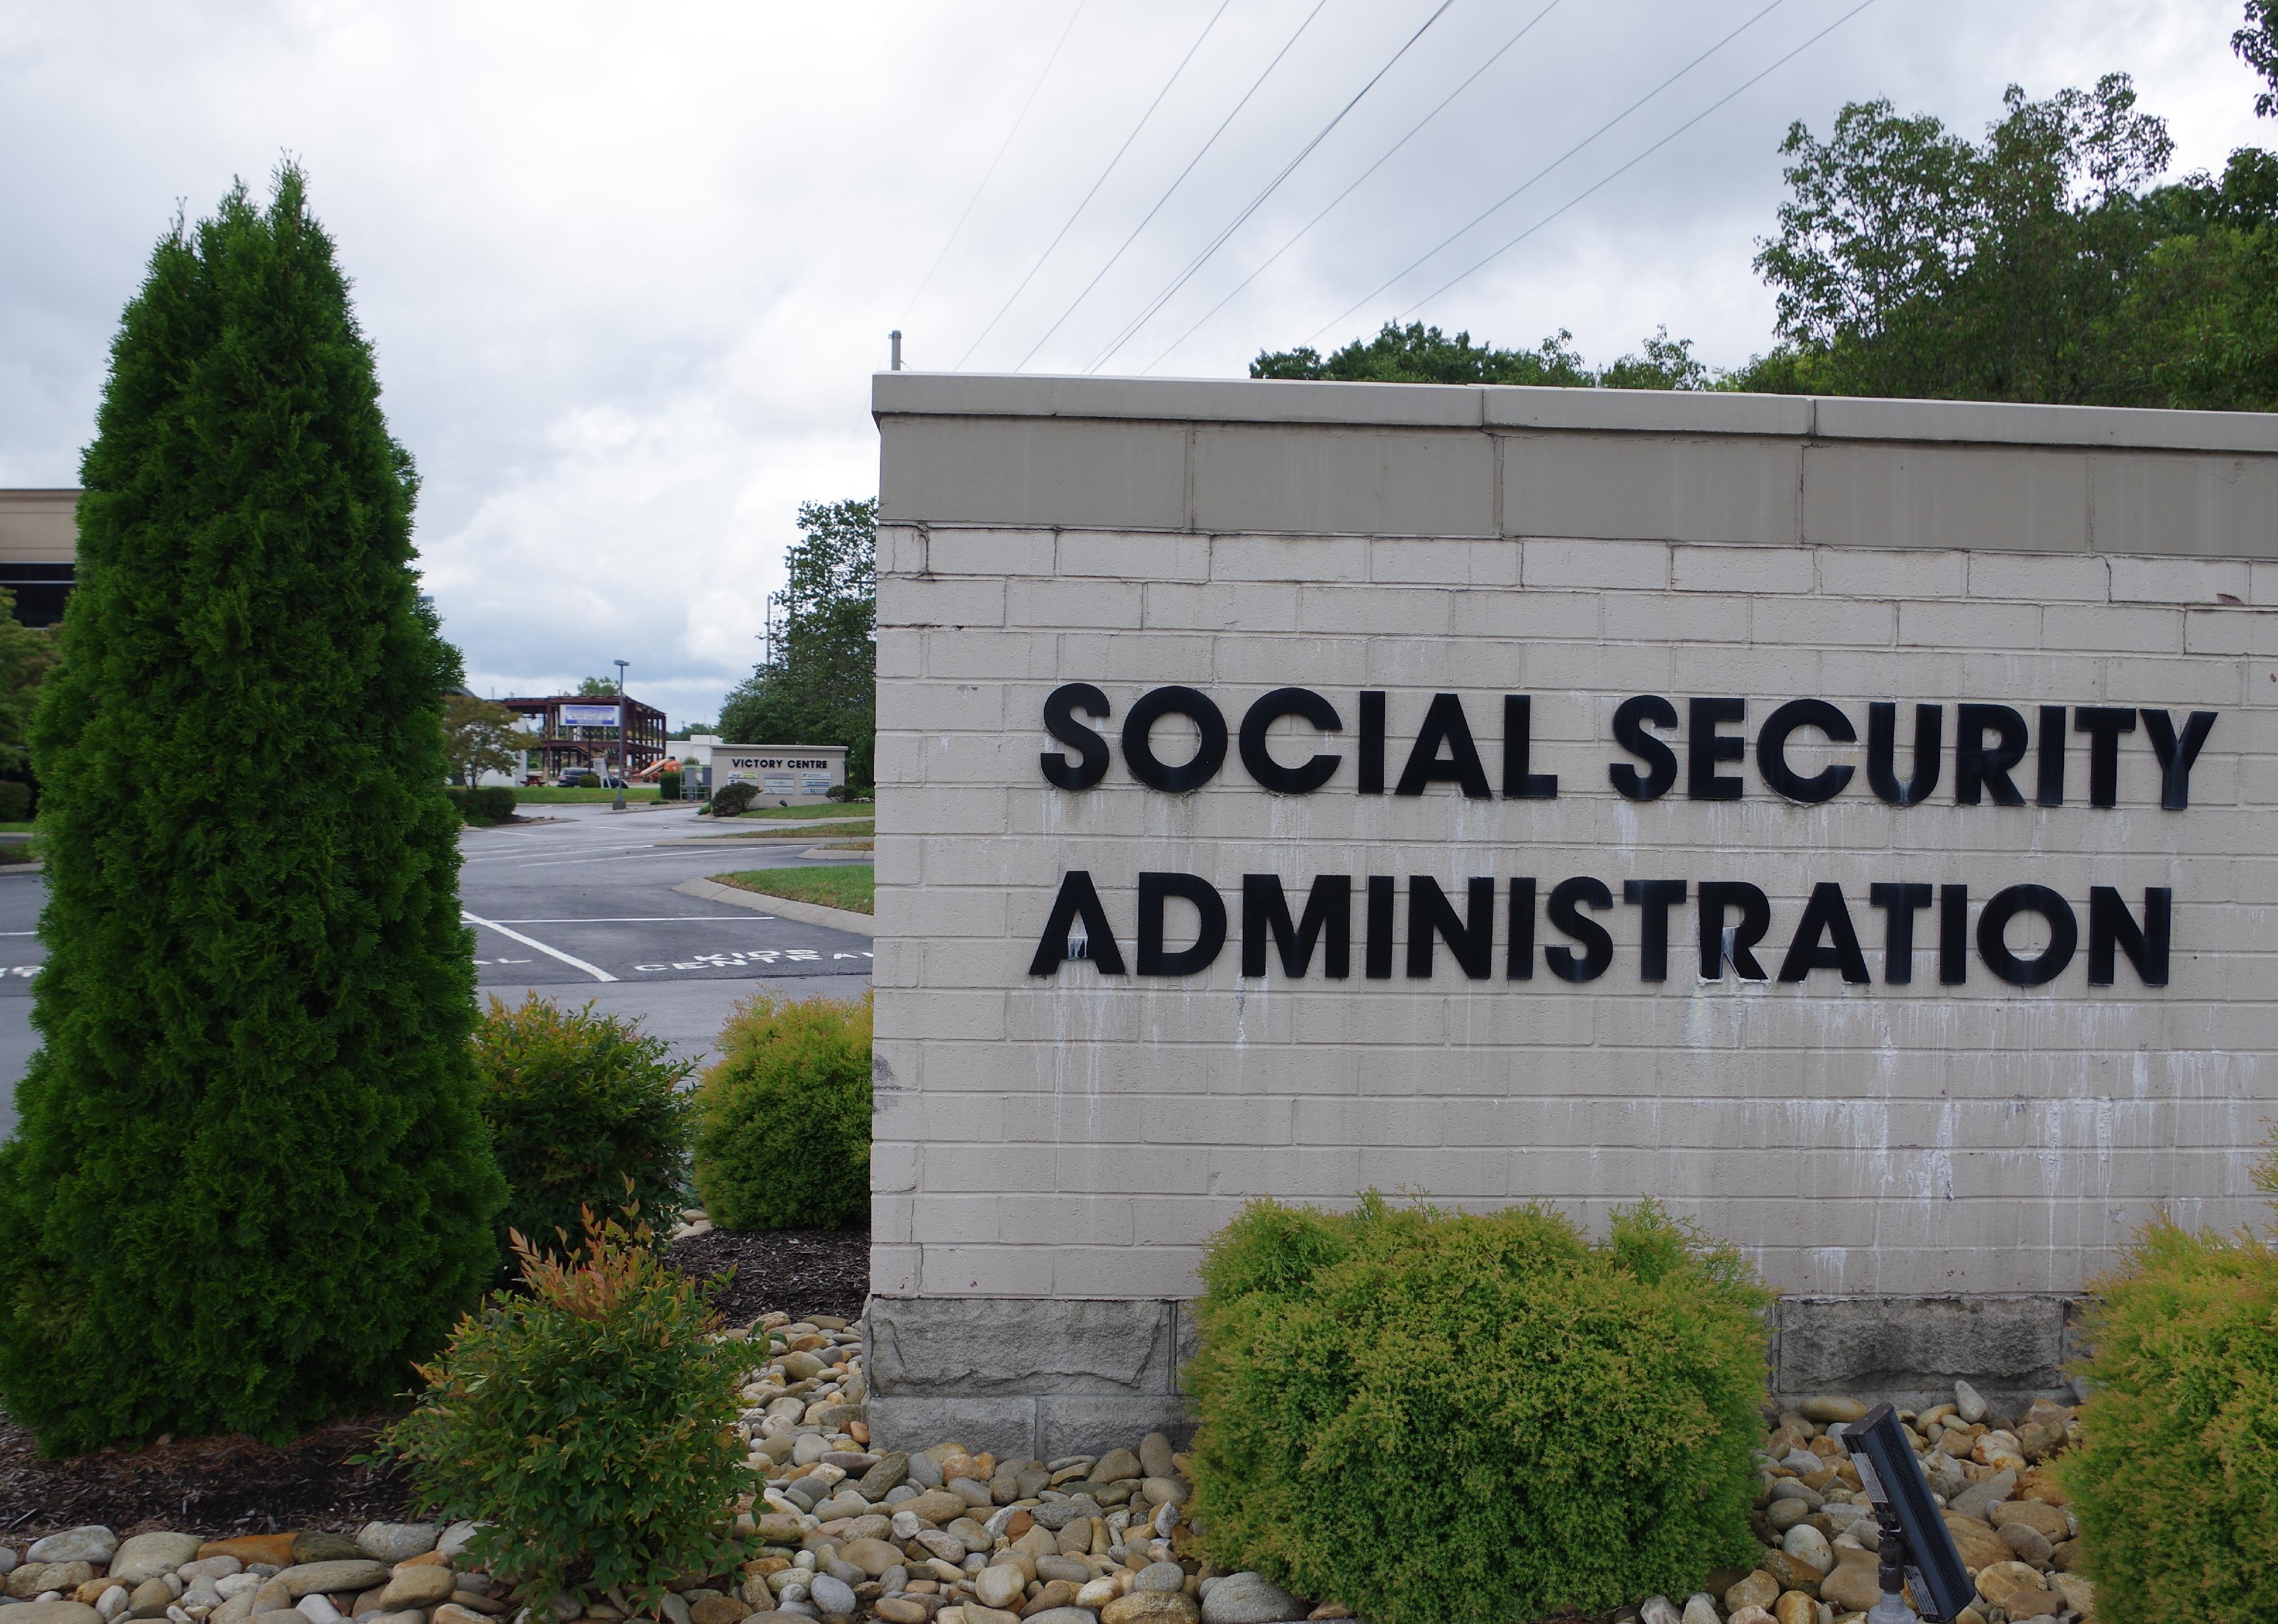 Social security administration brick sign.